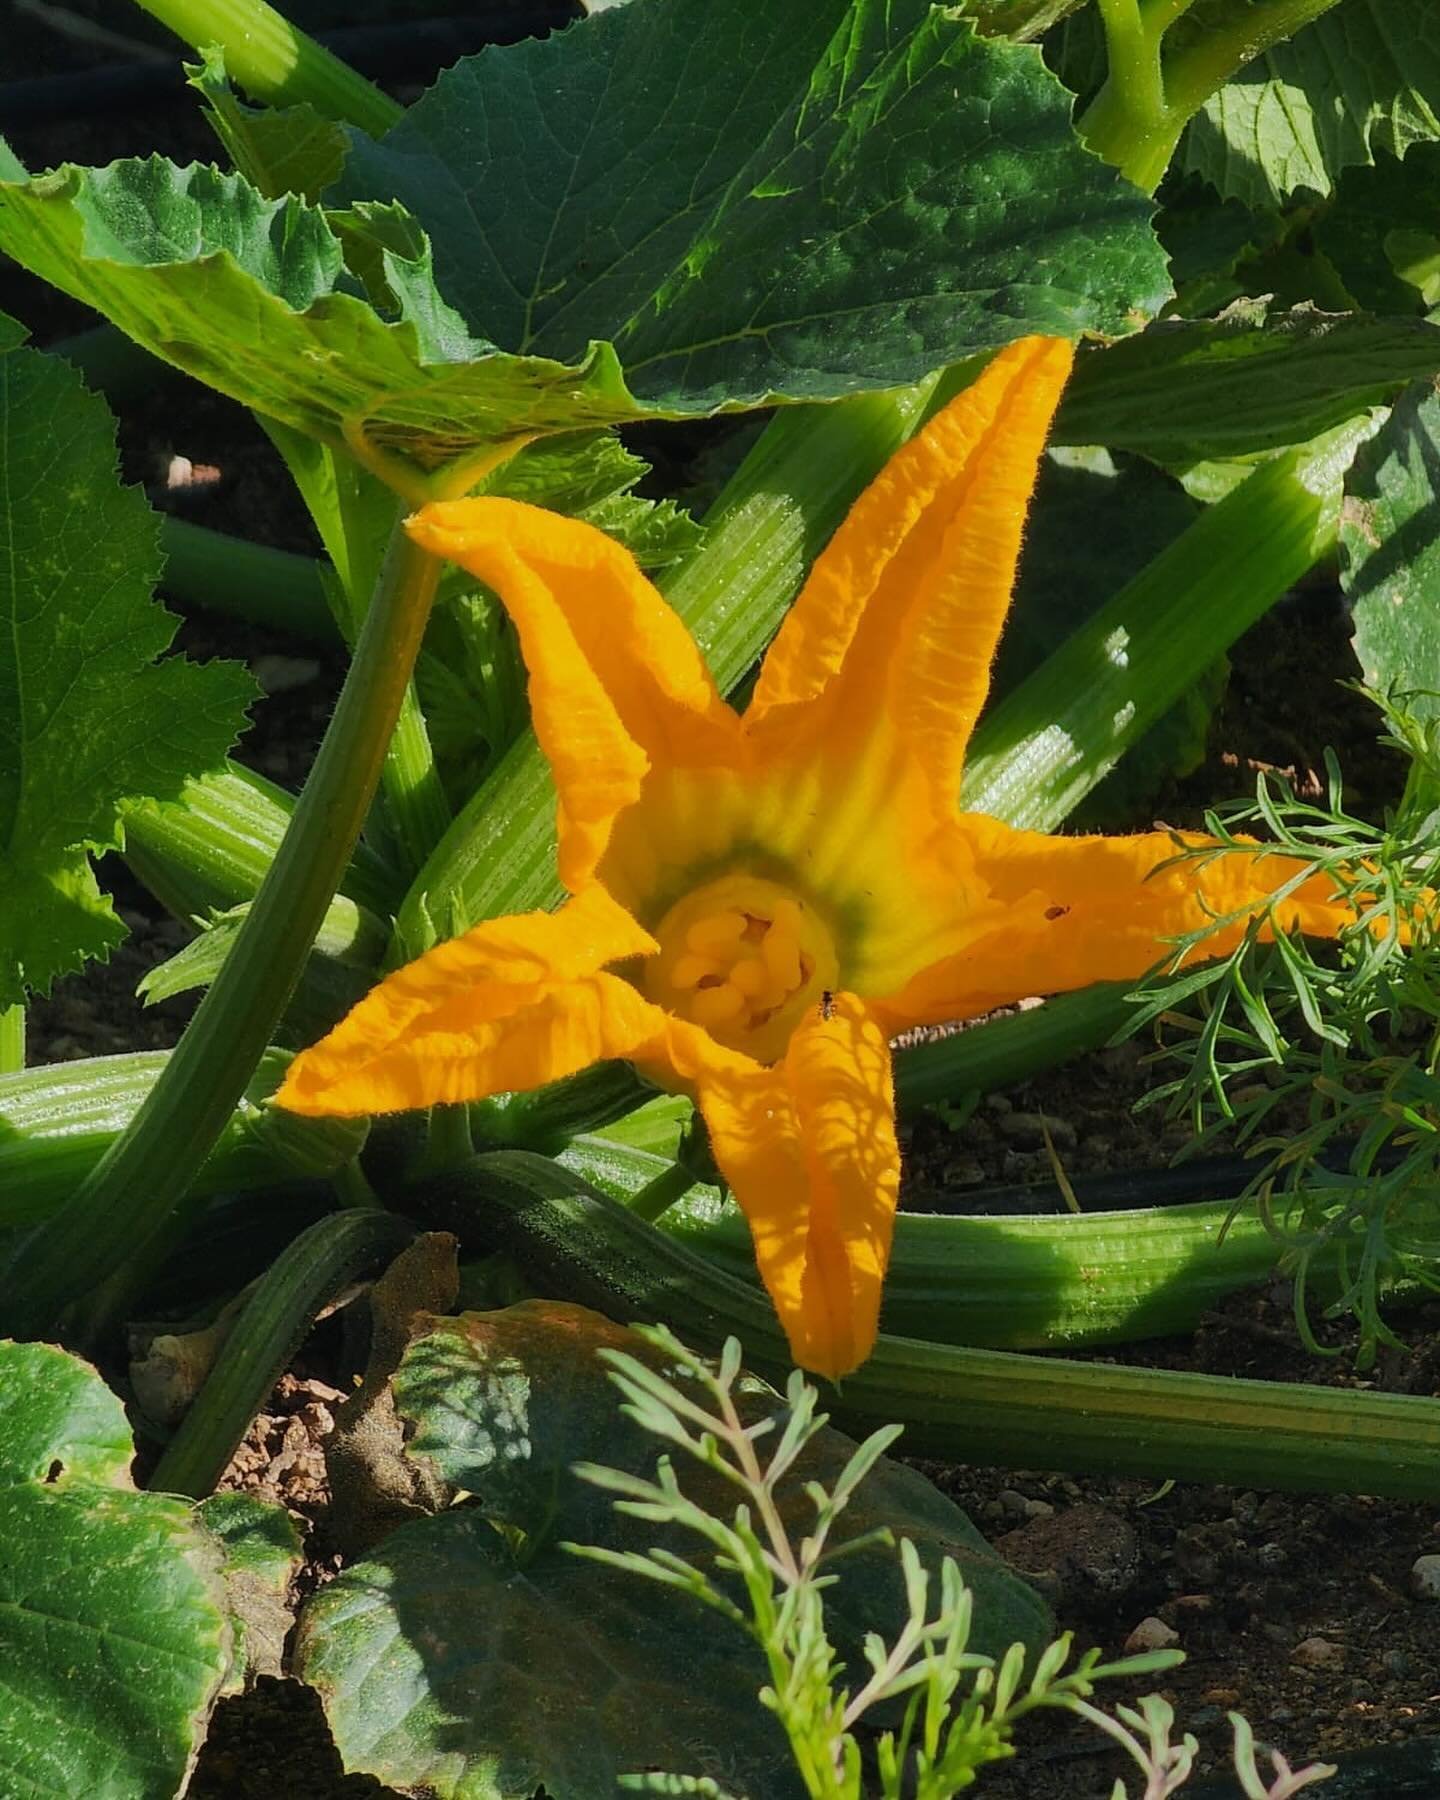 *insert squash pun here*

Thank you to our Professional Urban Farmer Sam for sending us this squash blossom photo taken out at our newest community garden in Henderson, Pumpkin Park!